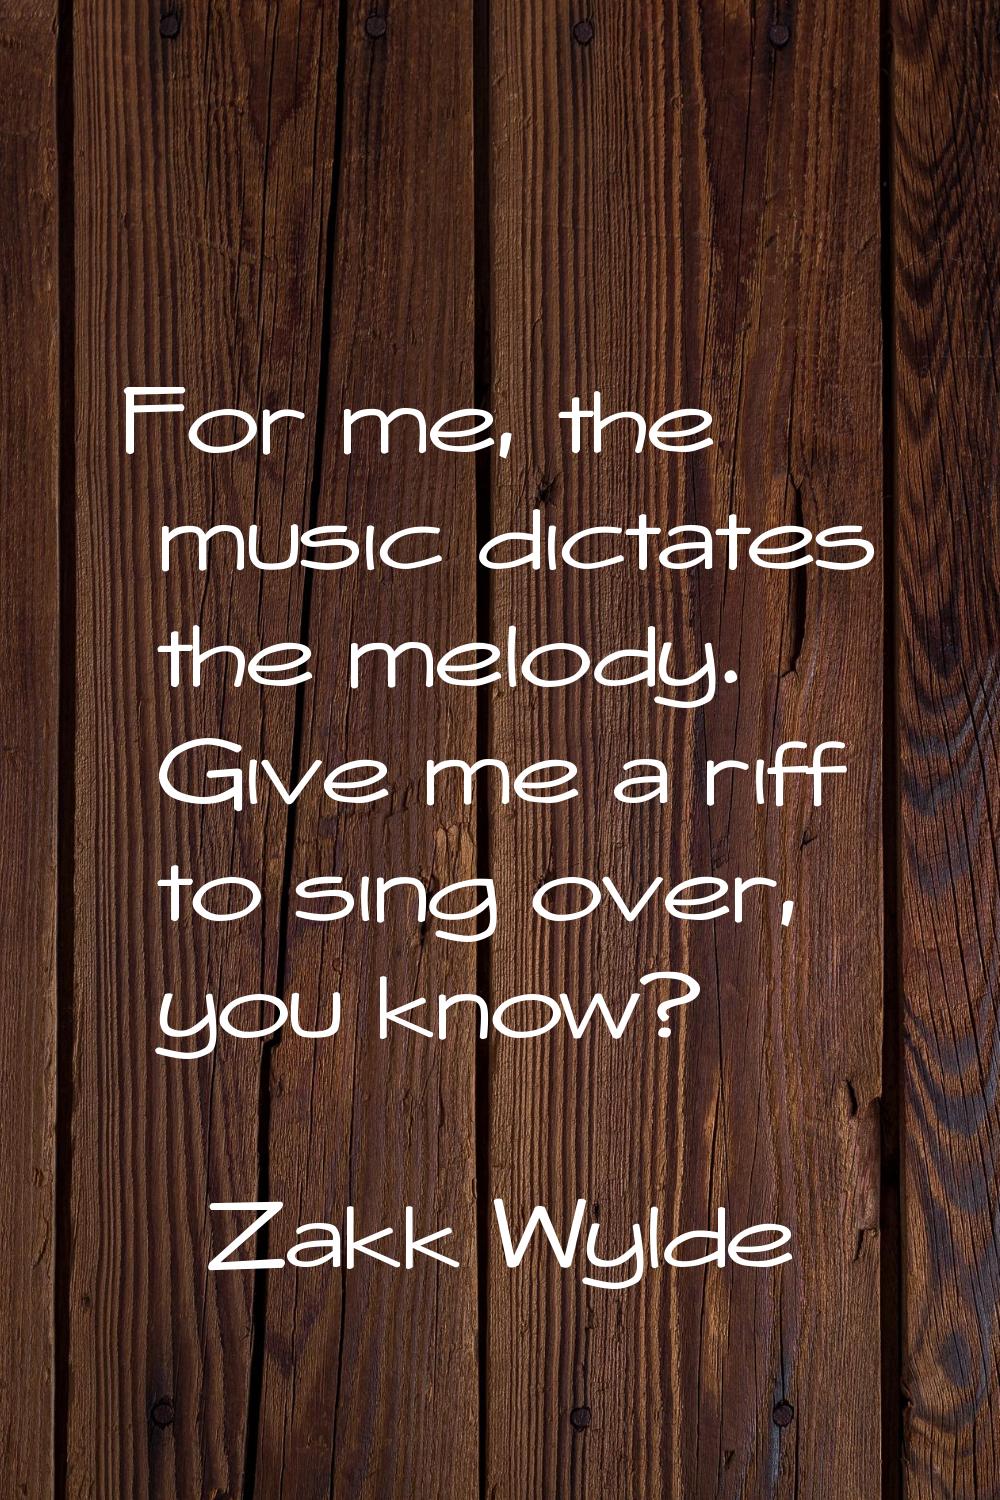 For me, the music dictates the melody. Give me a riff to sing over, you know?